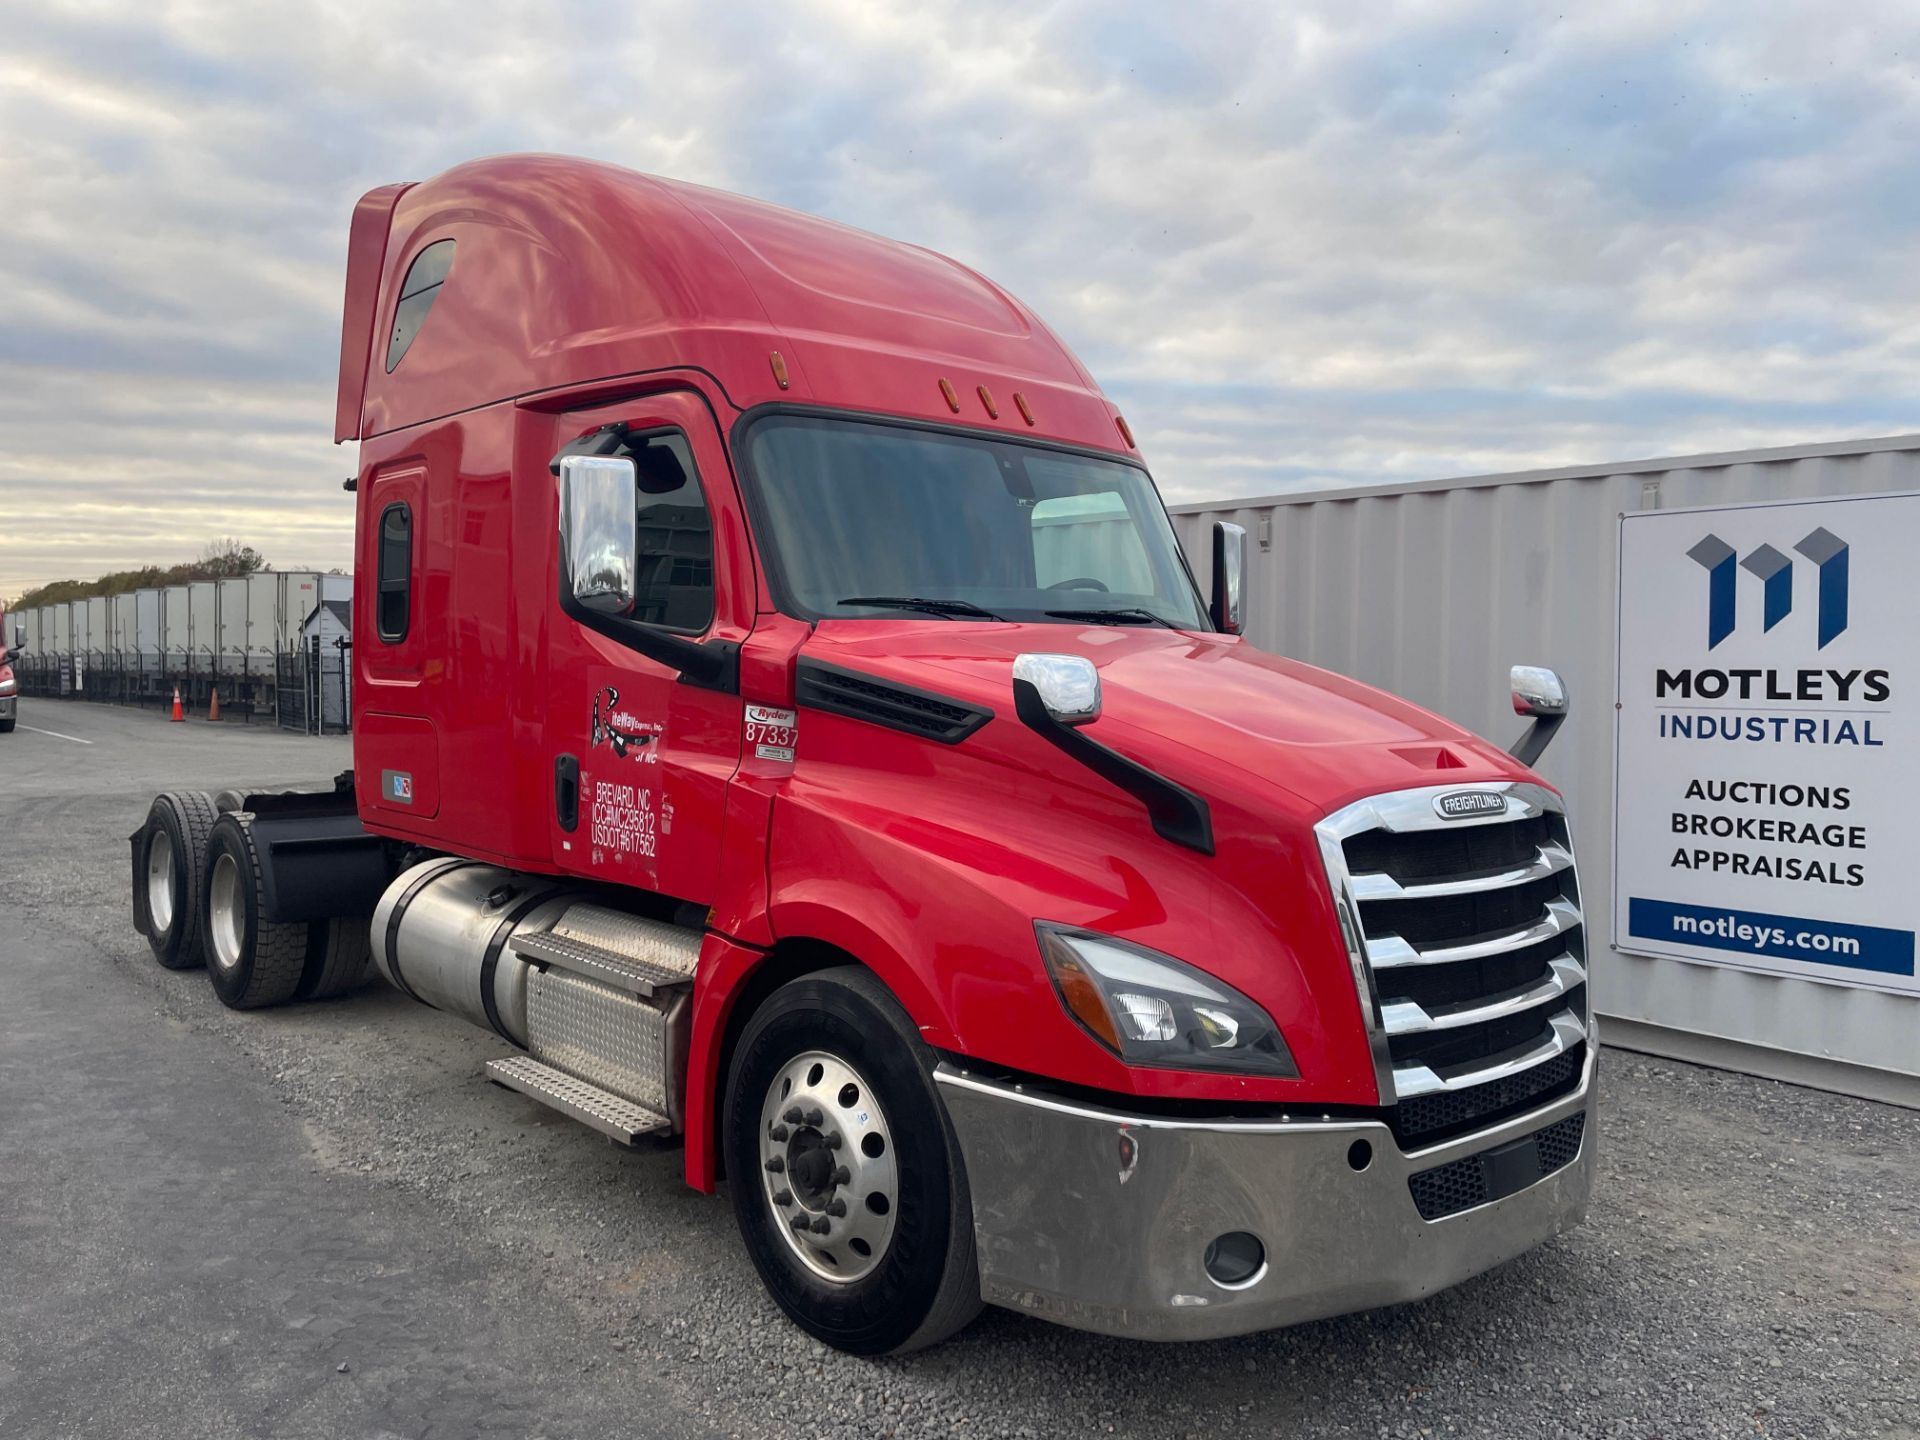 2019 Freightliner PX12664T Cascadia 126 T/A Sleeper Road Tractor